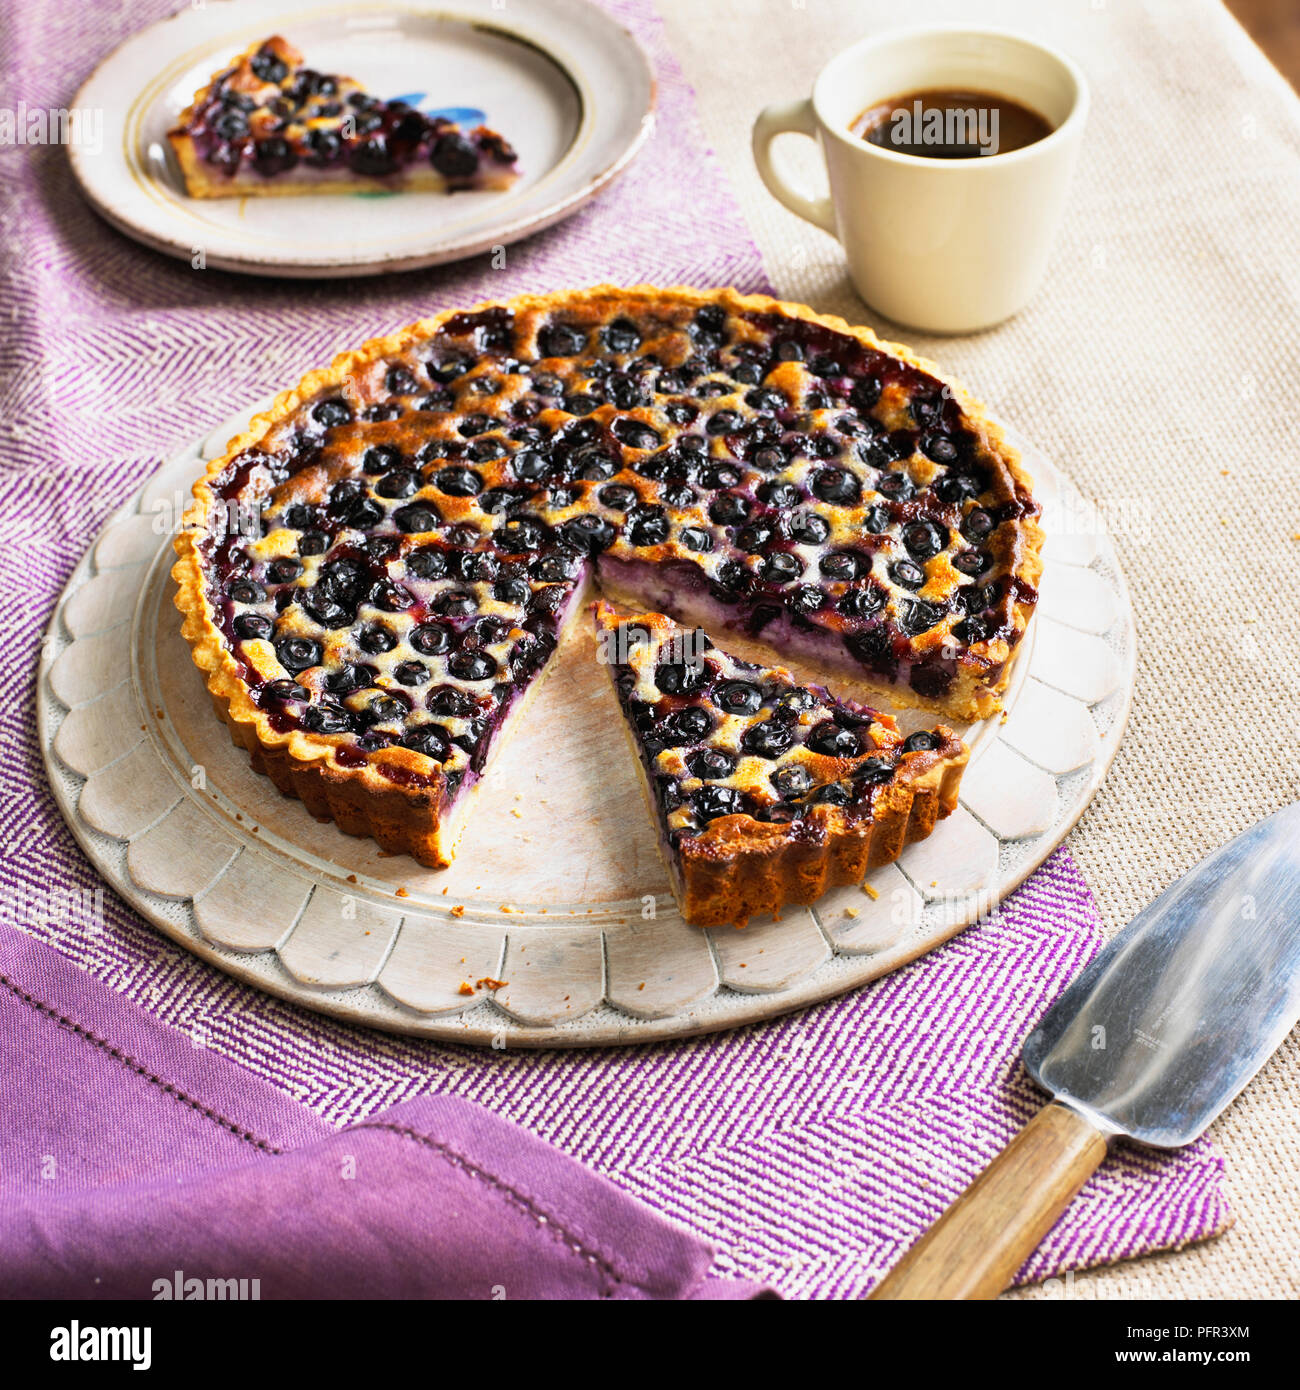 Blueberry cream cheese tart with slice cut away, cake server, coffee cup and separate slice on plate nearby Stock Photo